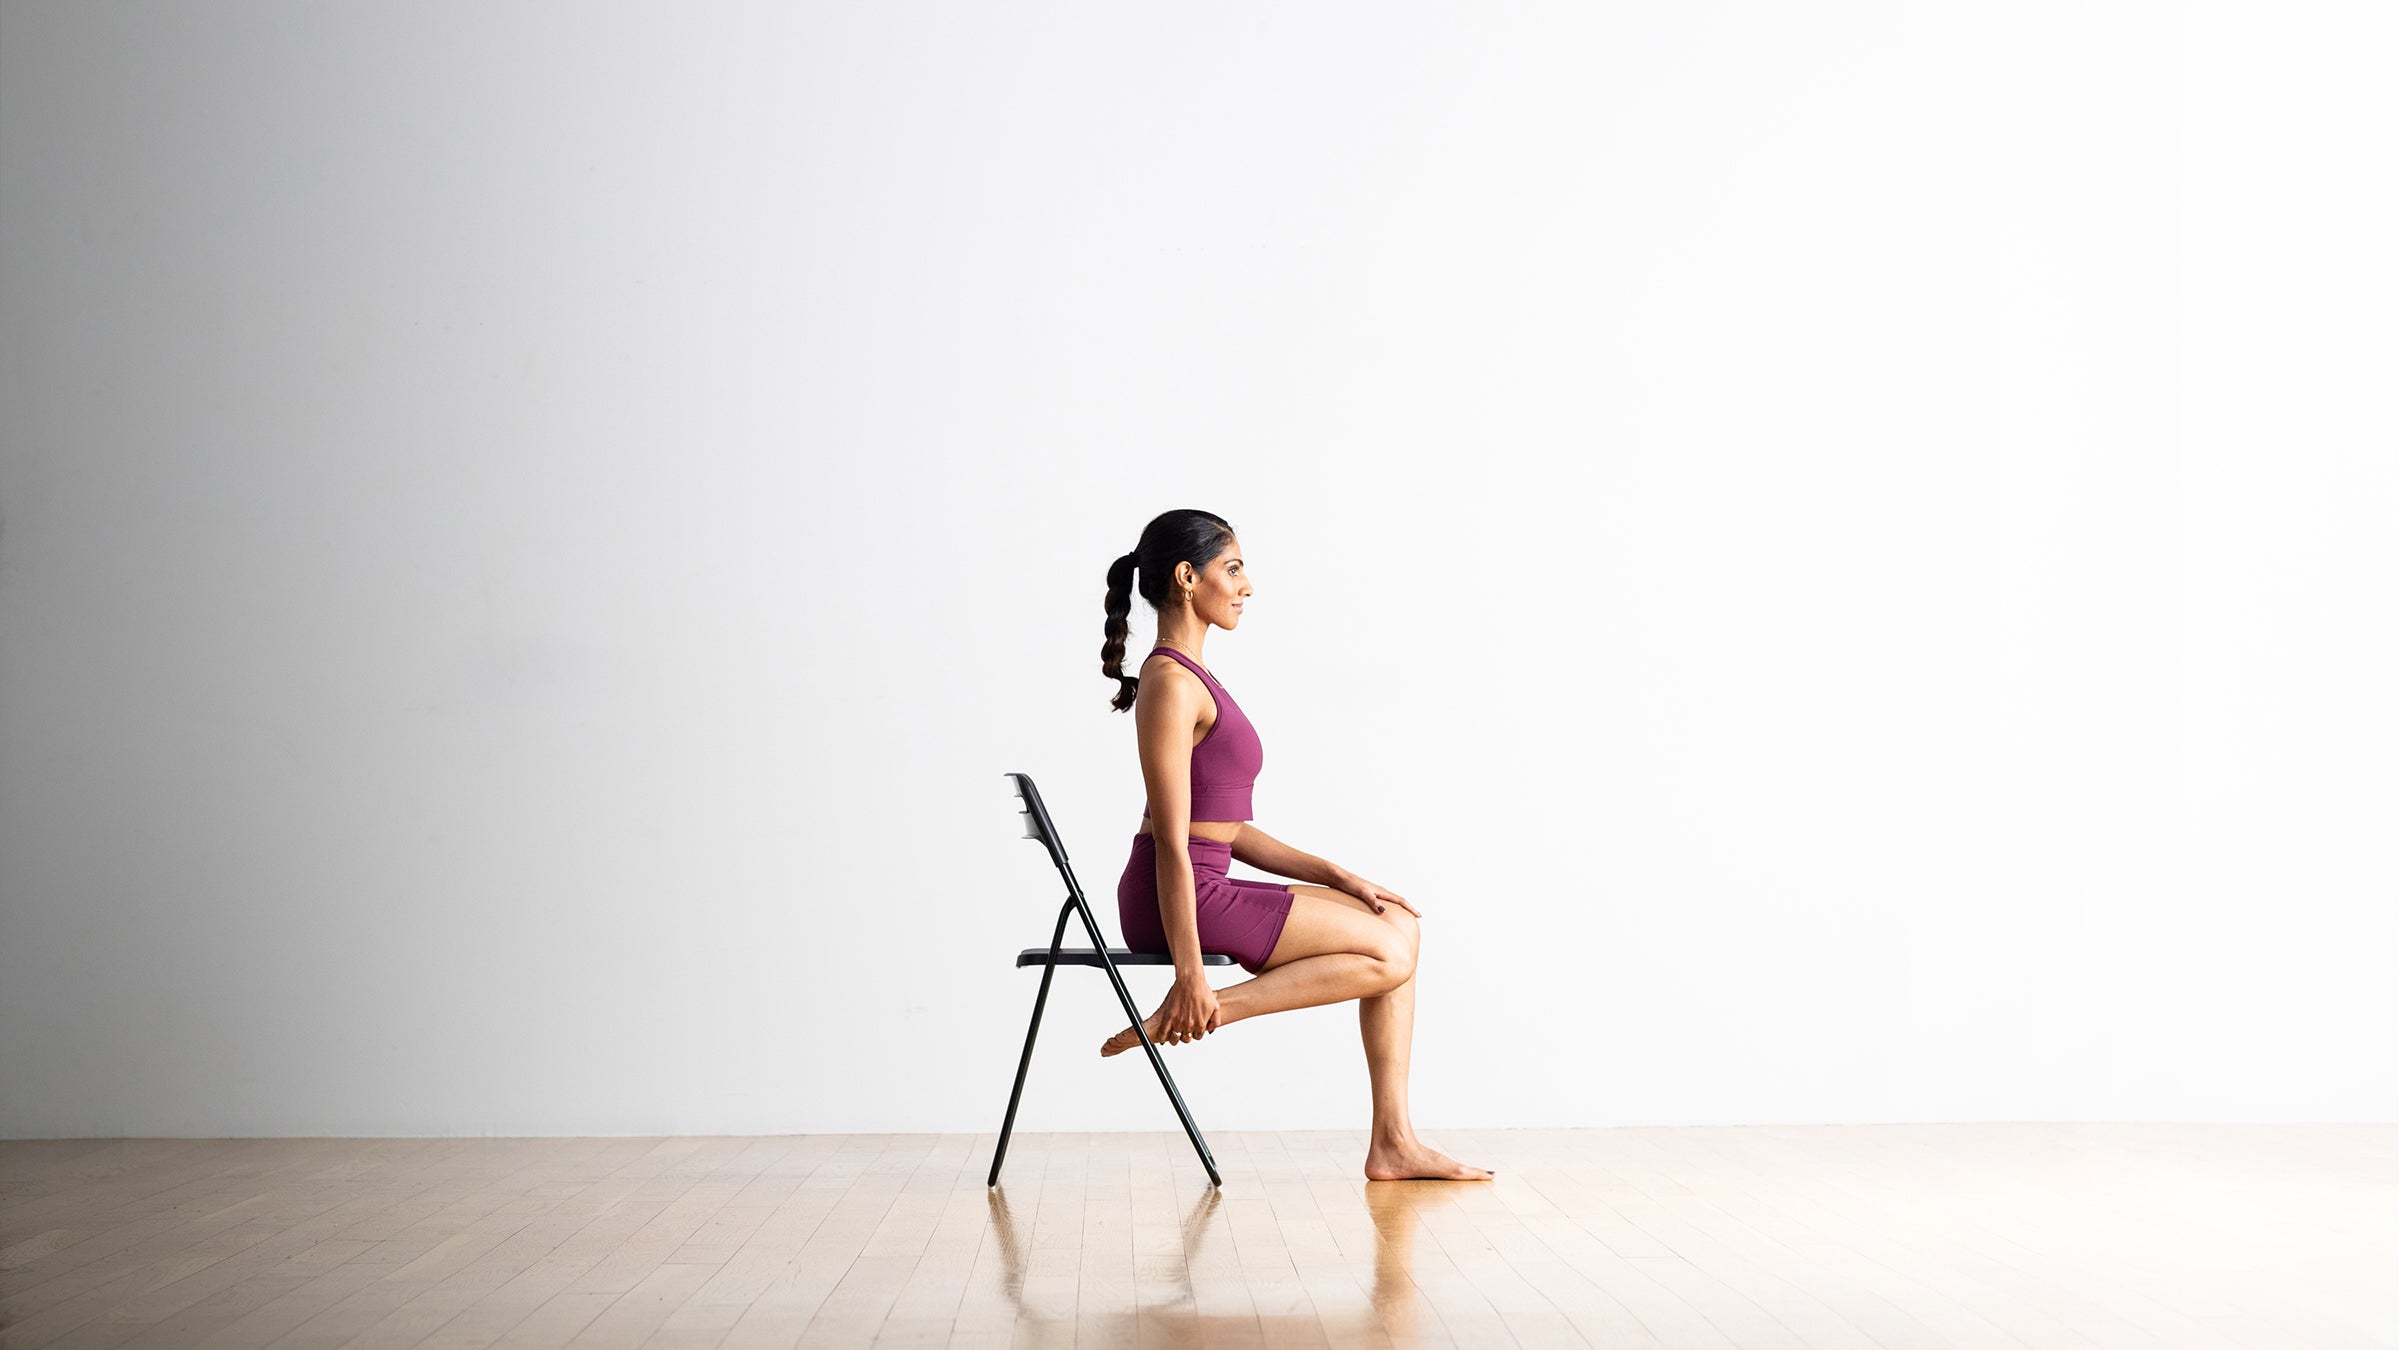 5 Chair Yoga Poses You Can Do Anywhere — Sol Vibe